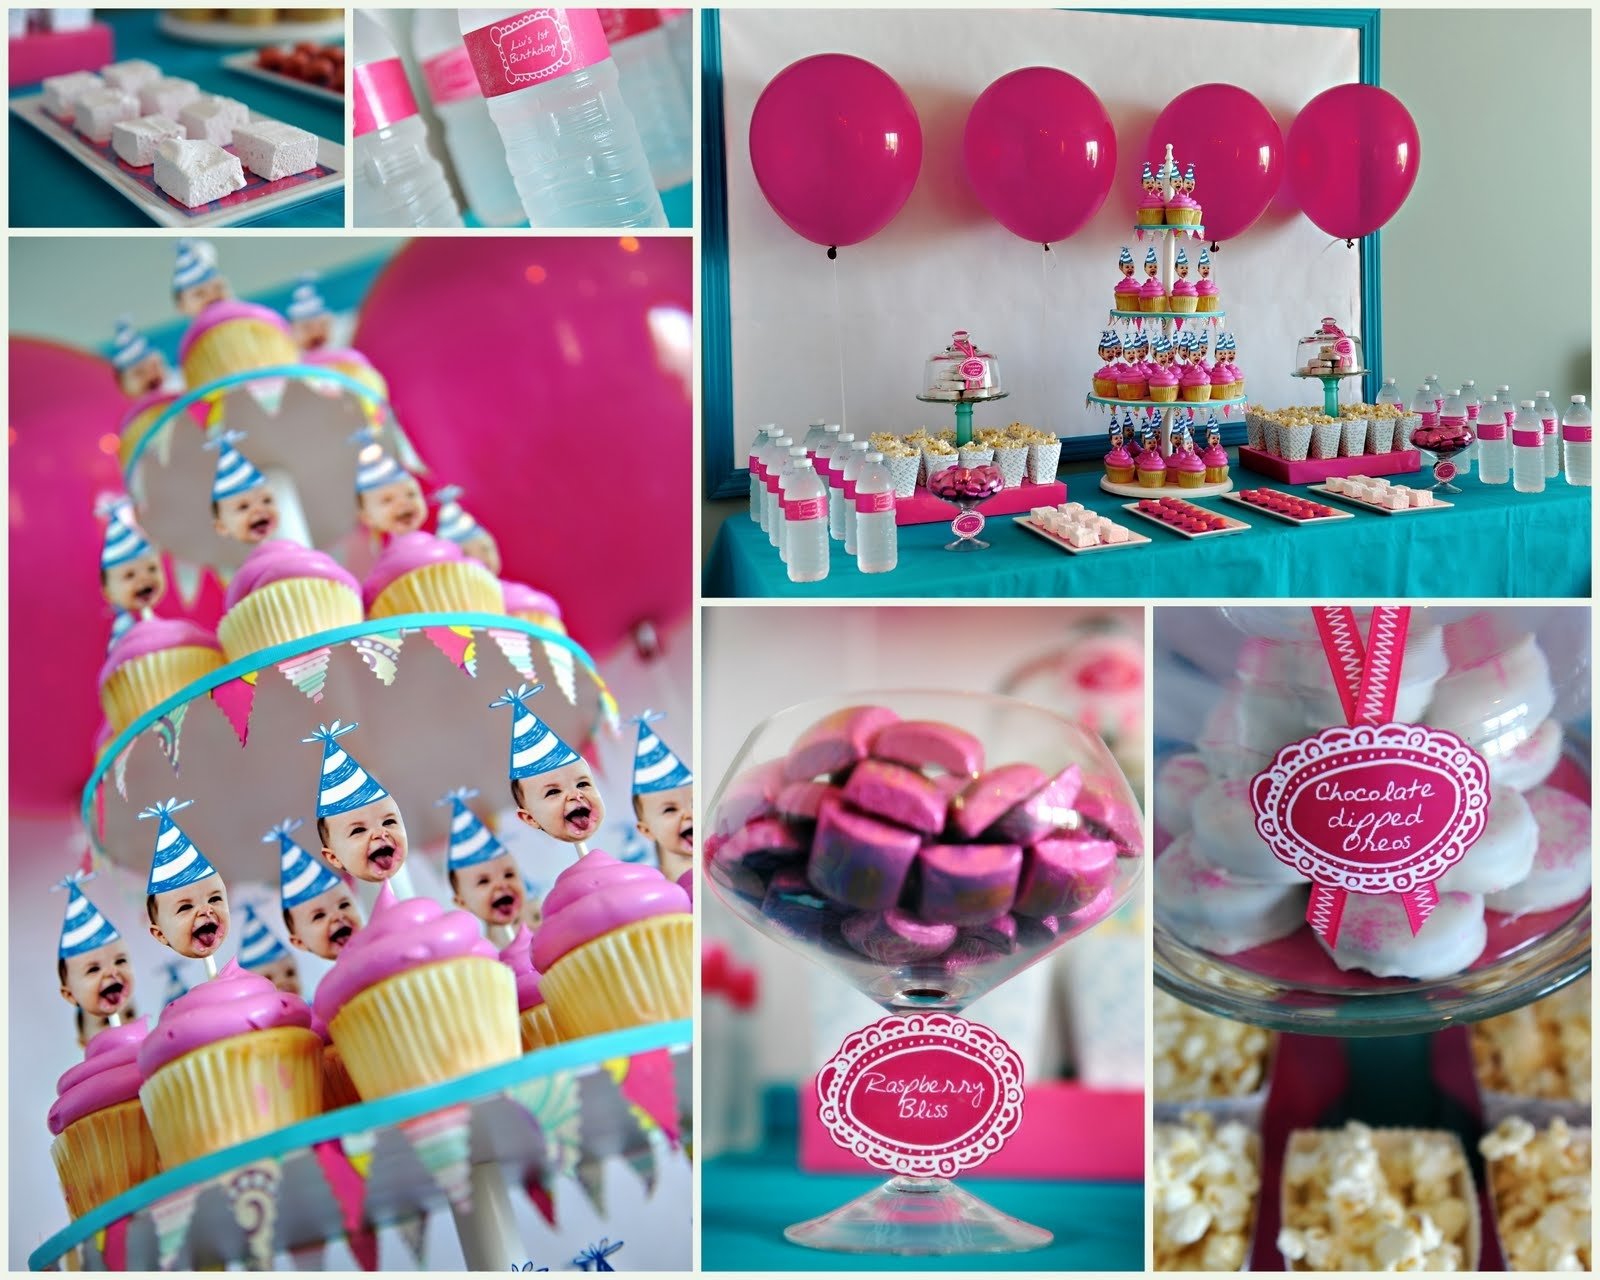 10 Famous 3 Year Old Girl Birthday Party Ideas birthday party ideas with balloon and cupcake lets party 1 2022